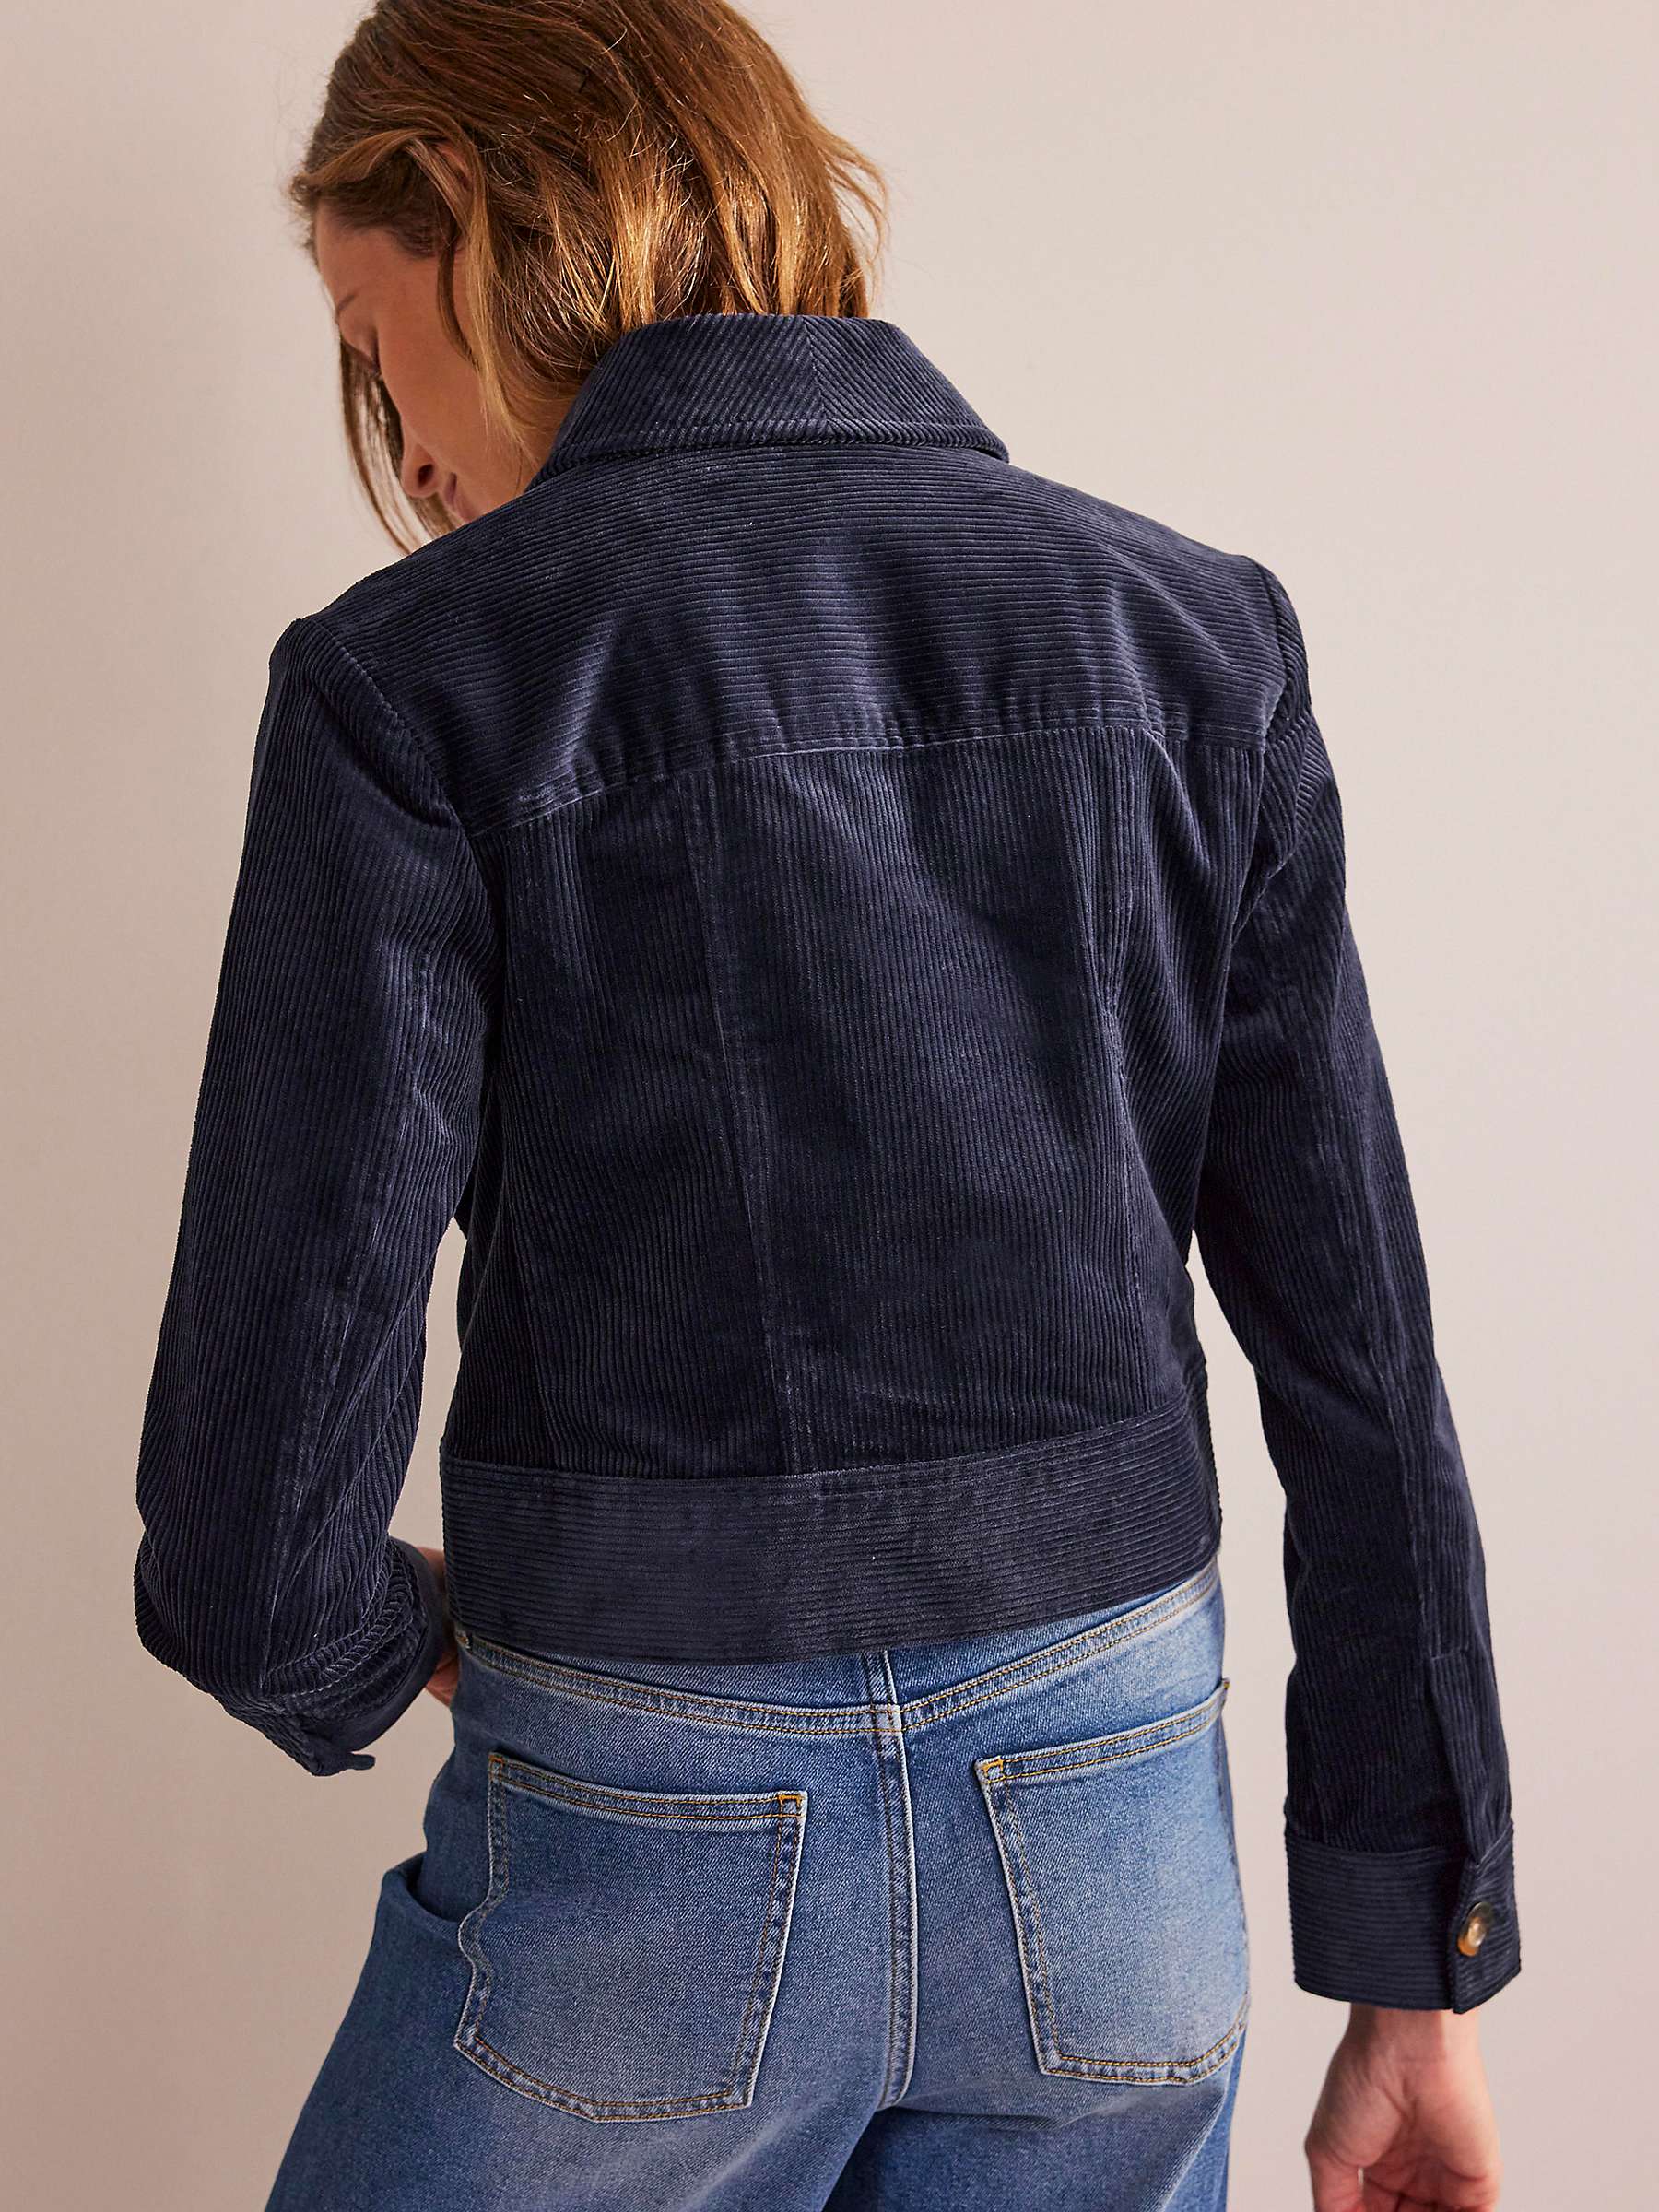 Buy Boden Boxy Cord Jacket Online at johnlewis.com